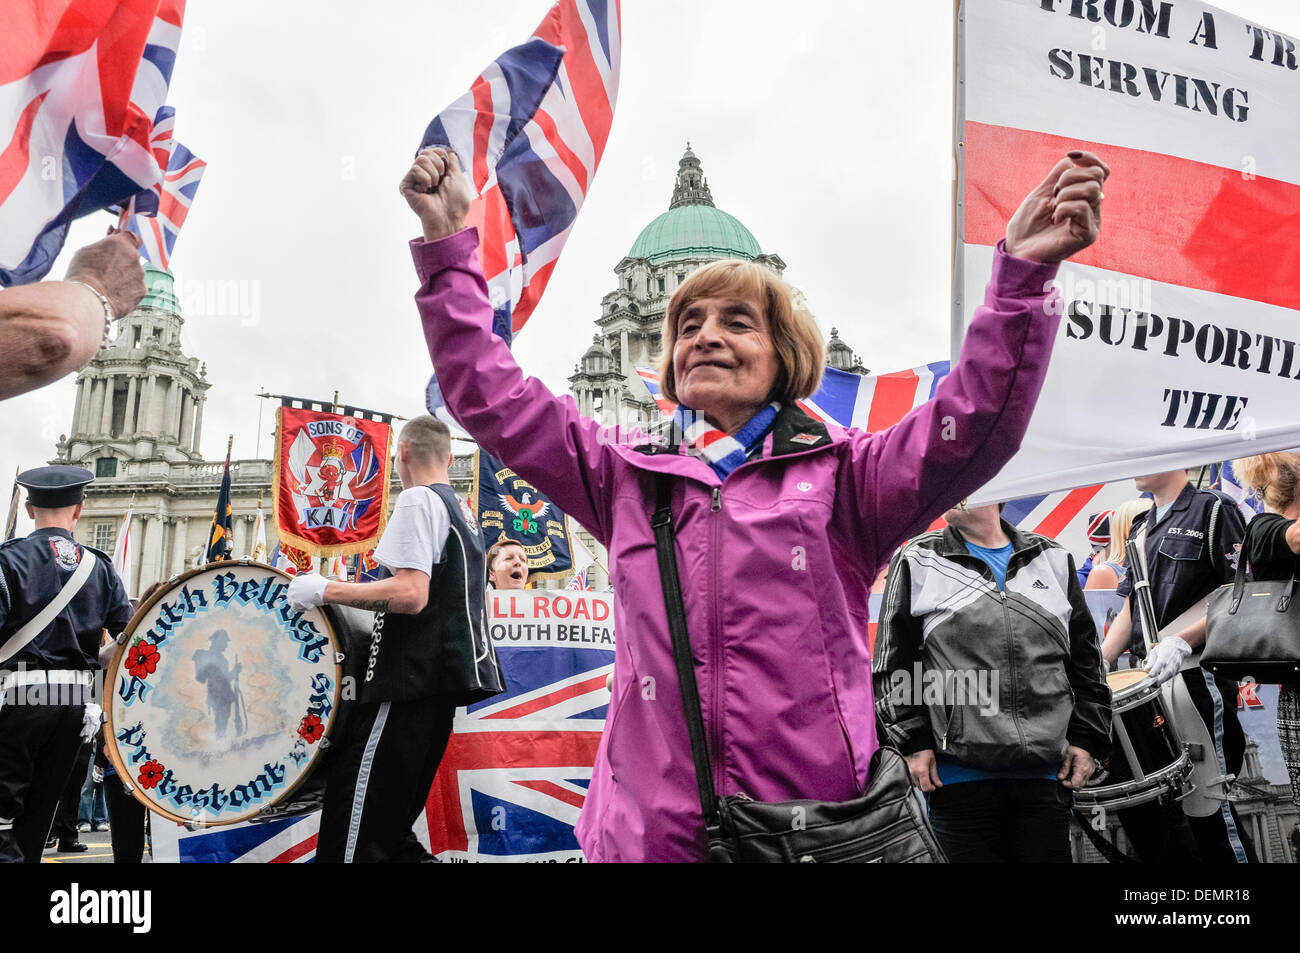 Belfast, Northern Ireland, 21st September 2013 - A 'flag protester' waves a union flag and dances in the parade. Credit:  Stephen Barnes/Alamy Live News Stock Photo